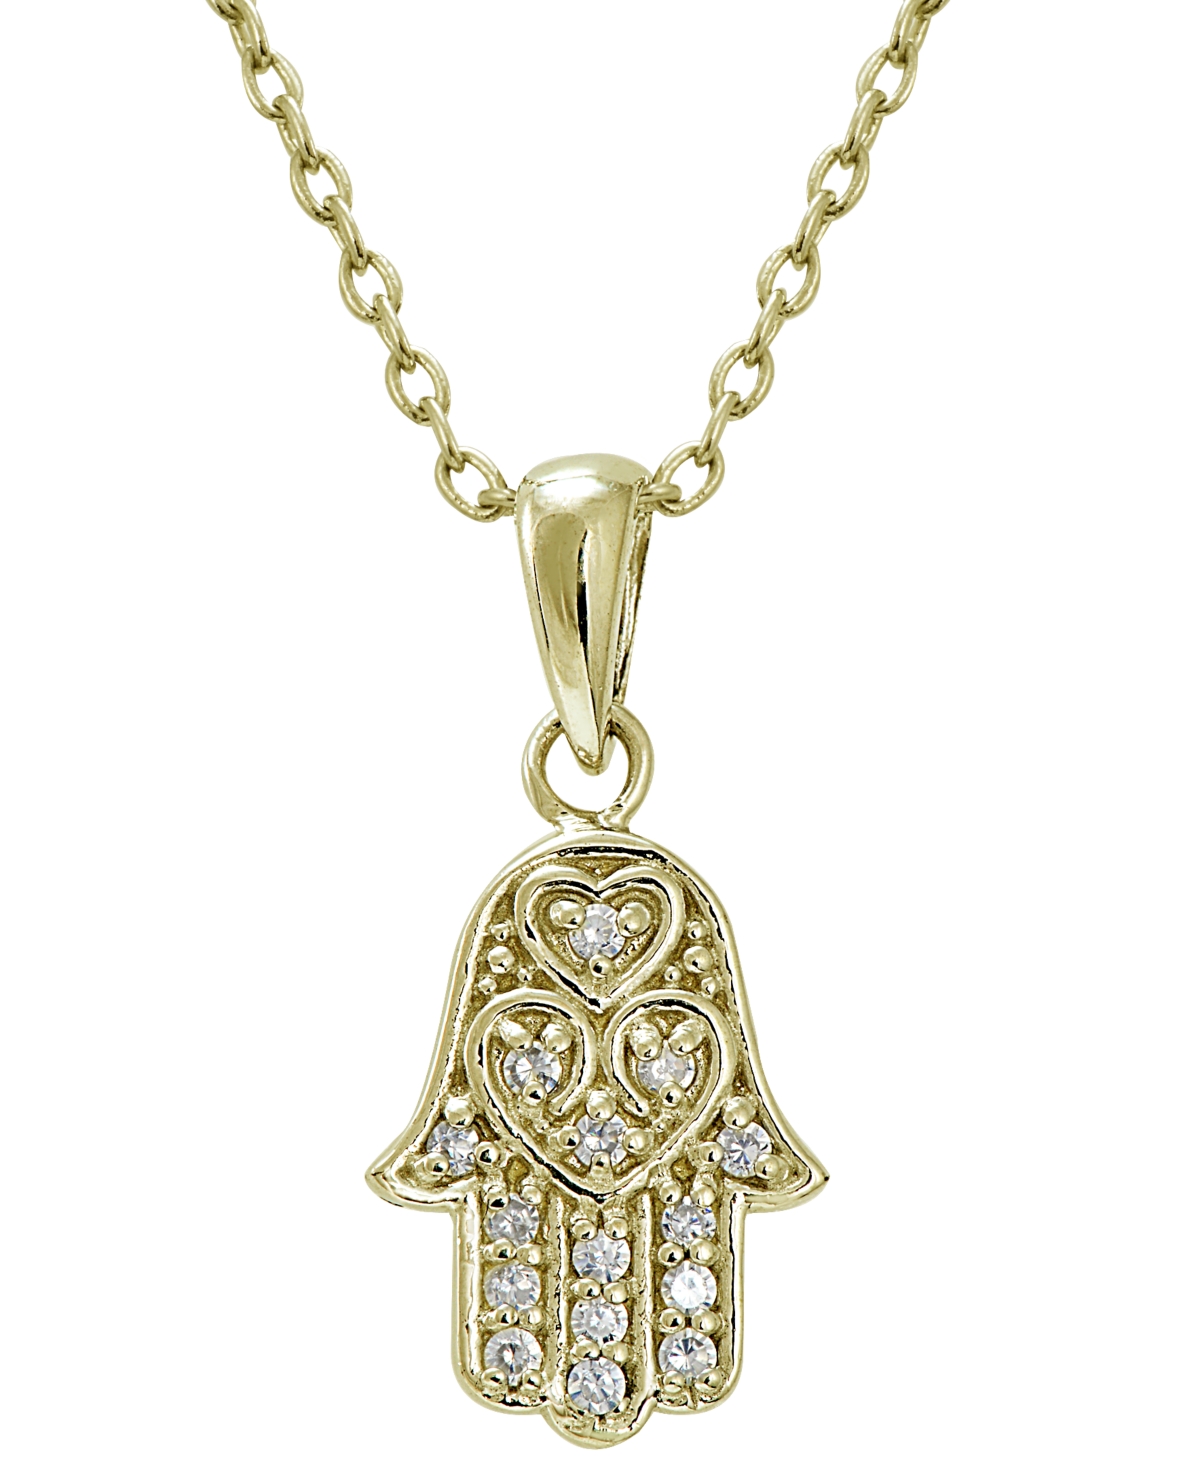 Cubic Zirconia Hamsa Pendant in 18k Gold Plated Sterling Silver - Gold